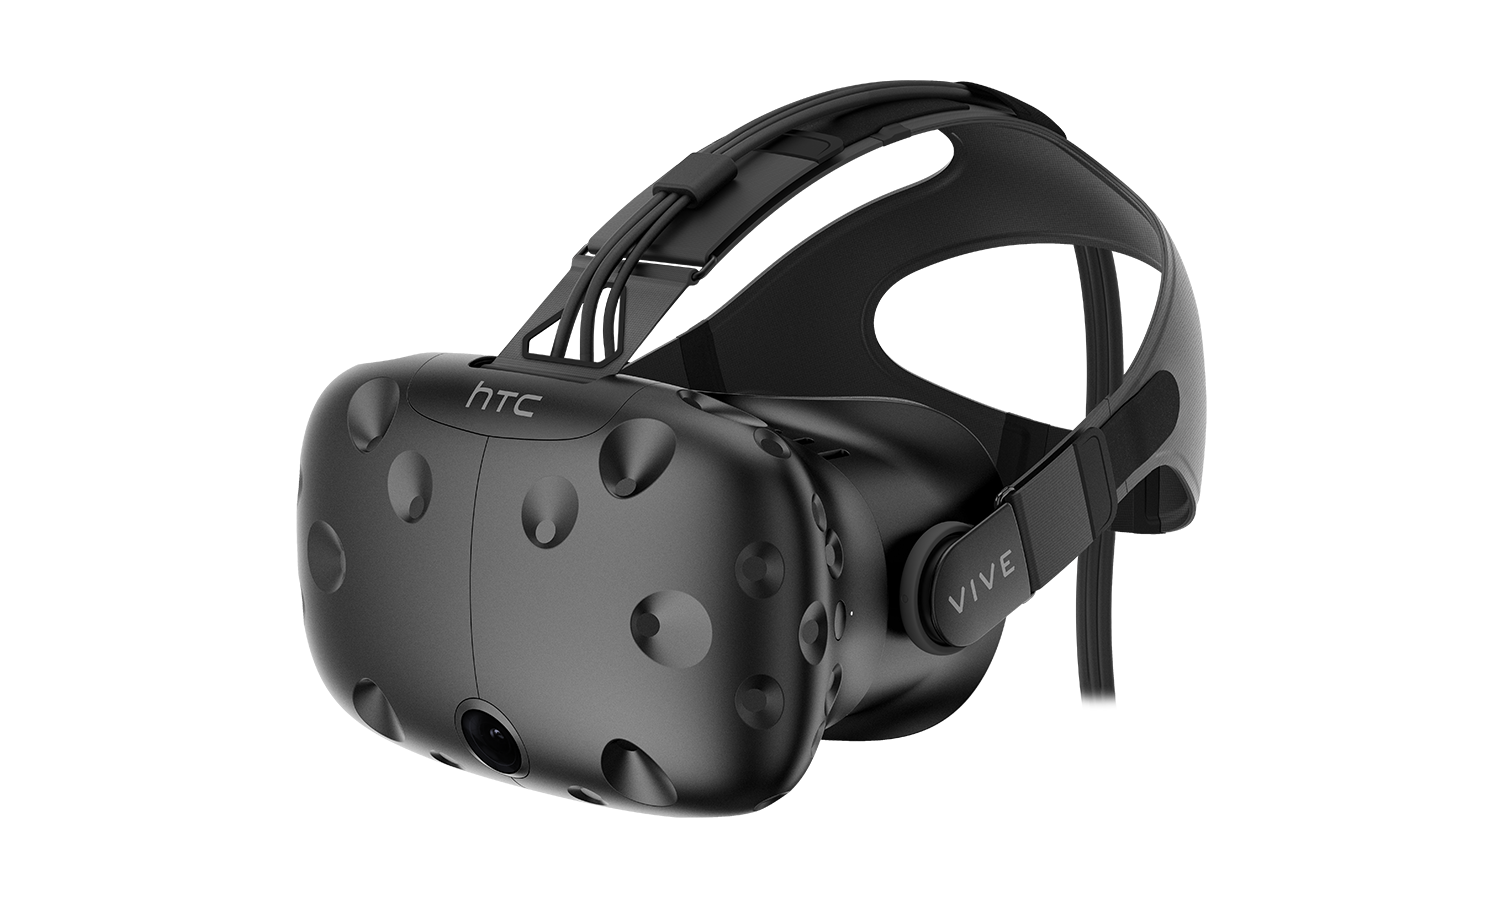 HTC's premium VR headset, the HTC Vive is slated get a successor after the company is pegged to unveil the HTC Vive 2 at the CES 2017.